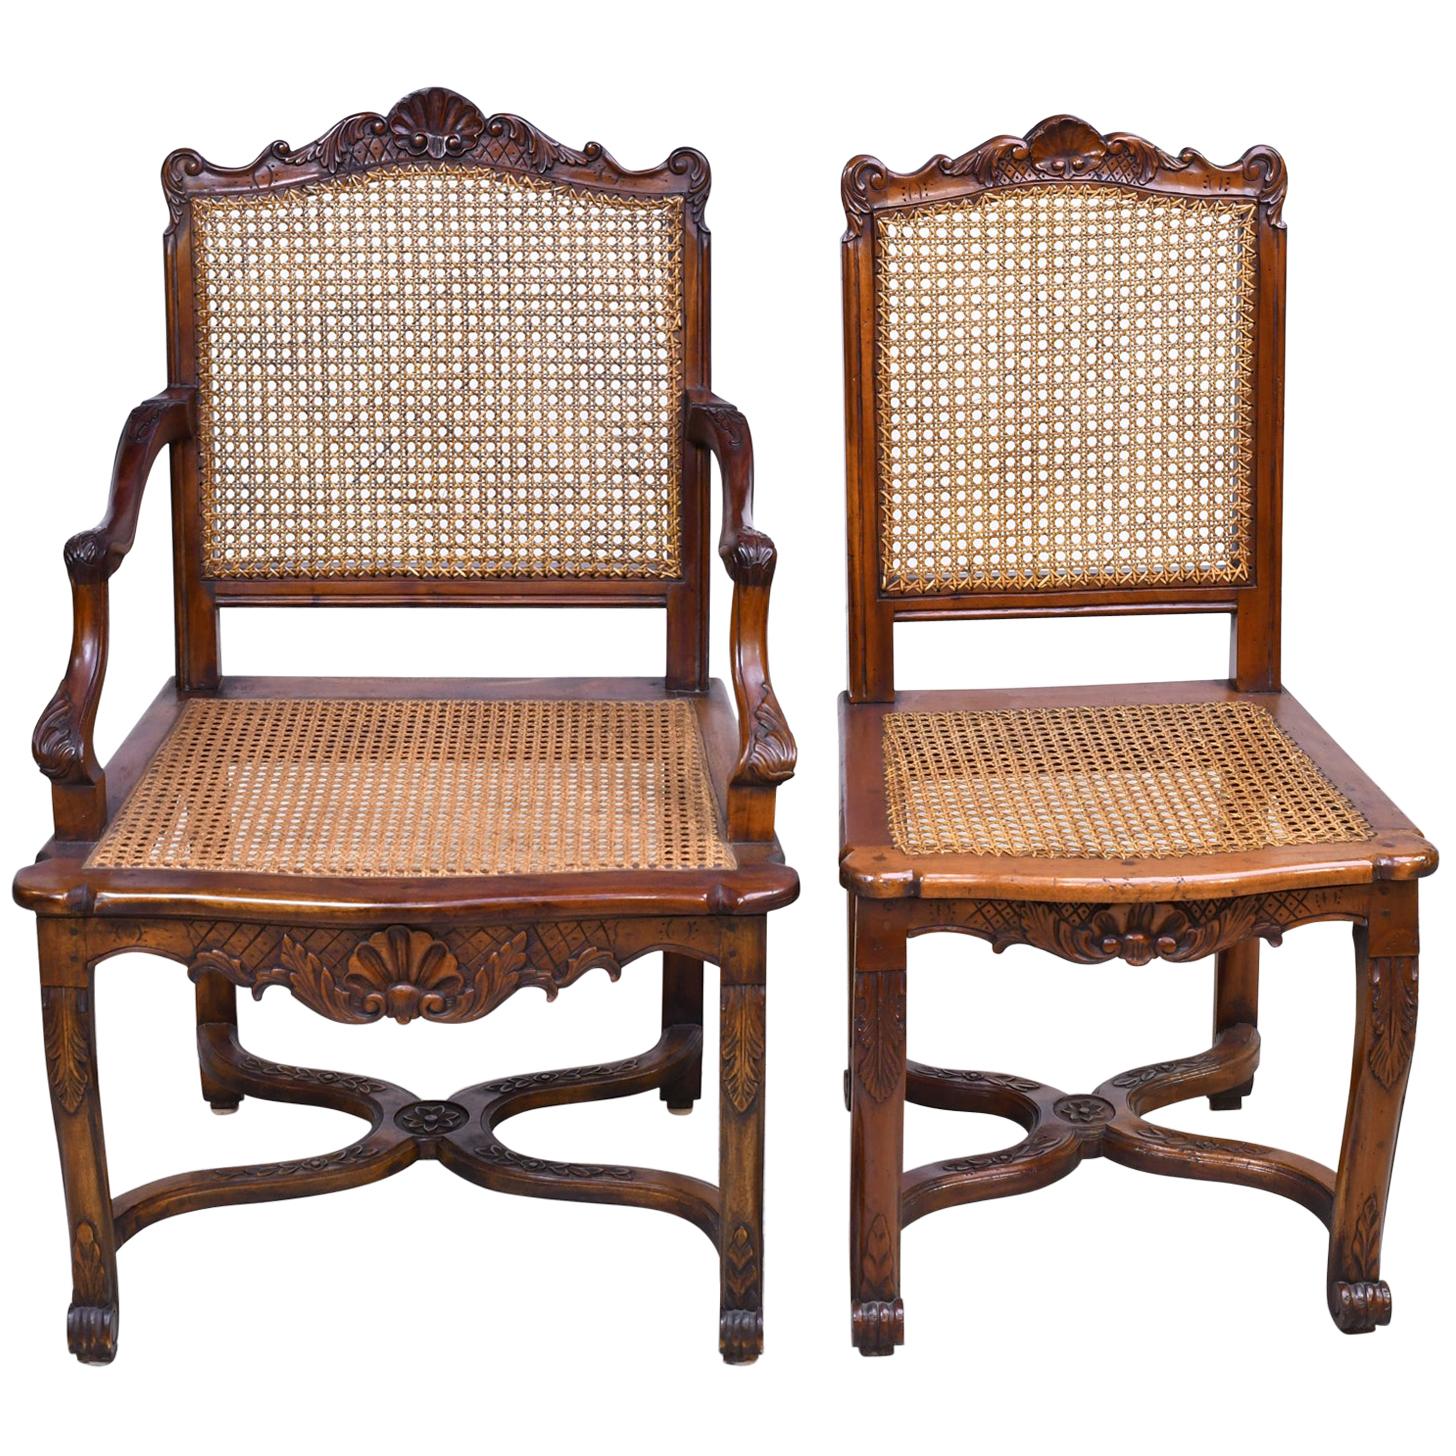 Set of 10 French Louis XVI style mahogany chairs beautifully carved with cane seats and back. Pair of armchairs and 8 side chairs.
Great buy but 5 of the 10 chairs need the seats replaced. The seats frames are pegged in and are removable.
We can